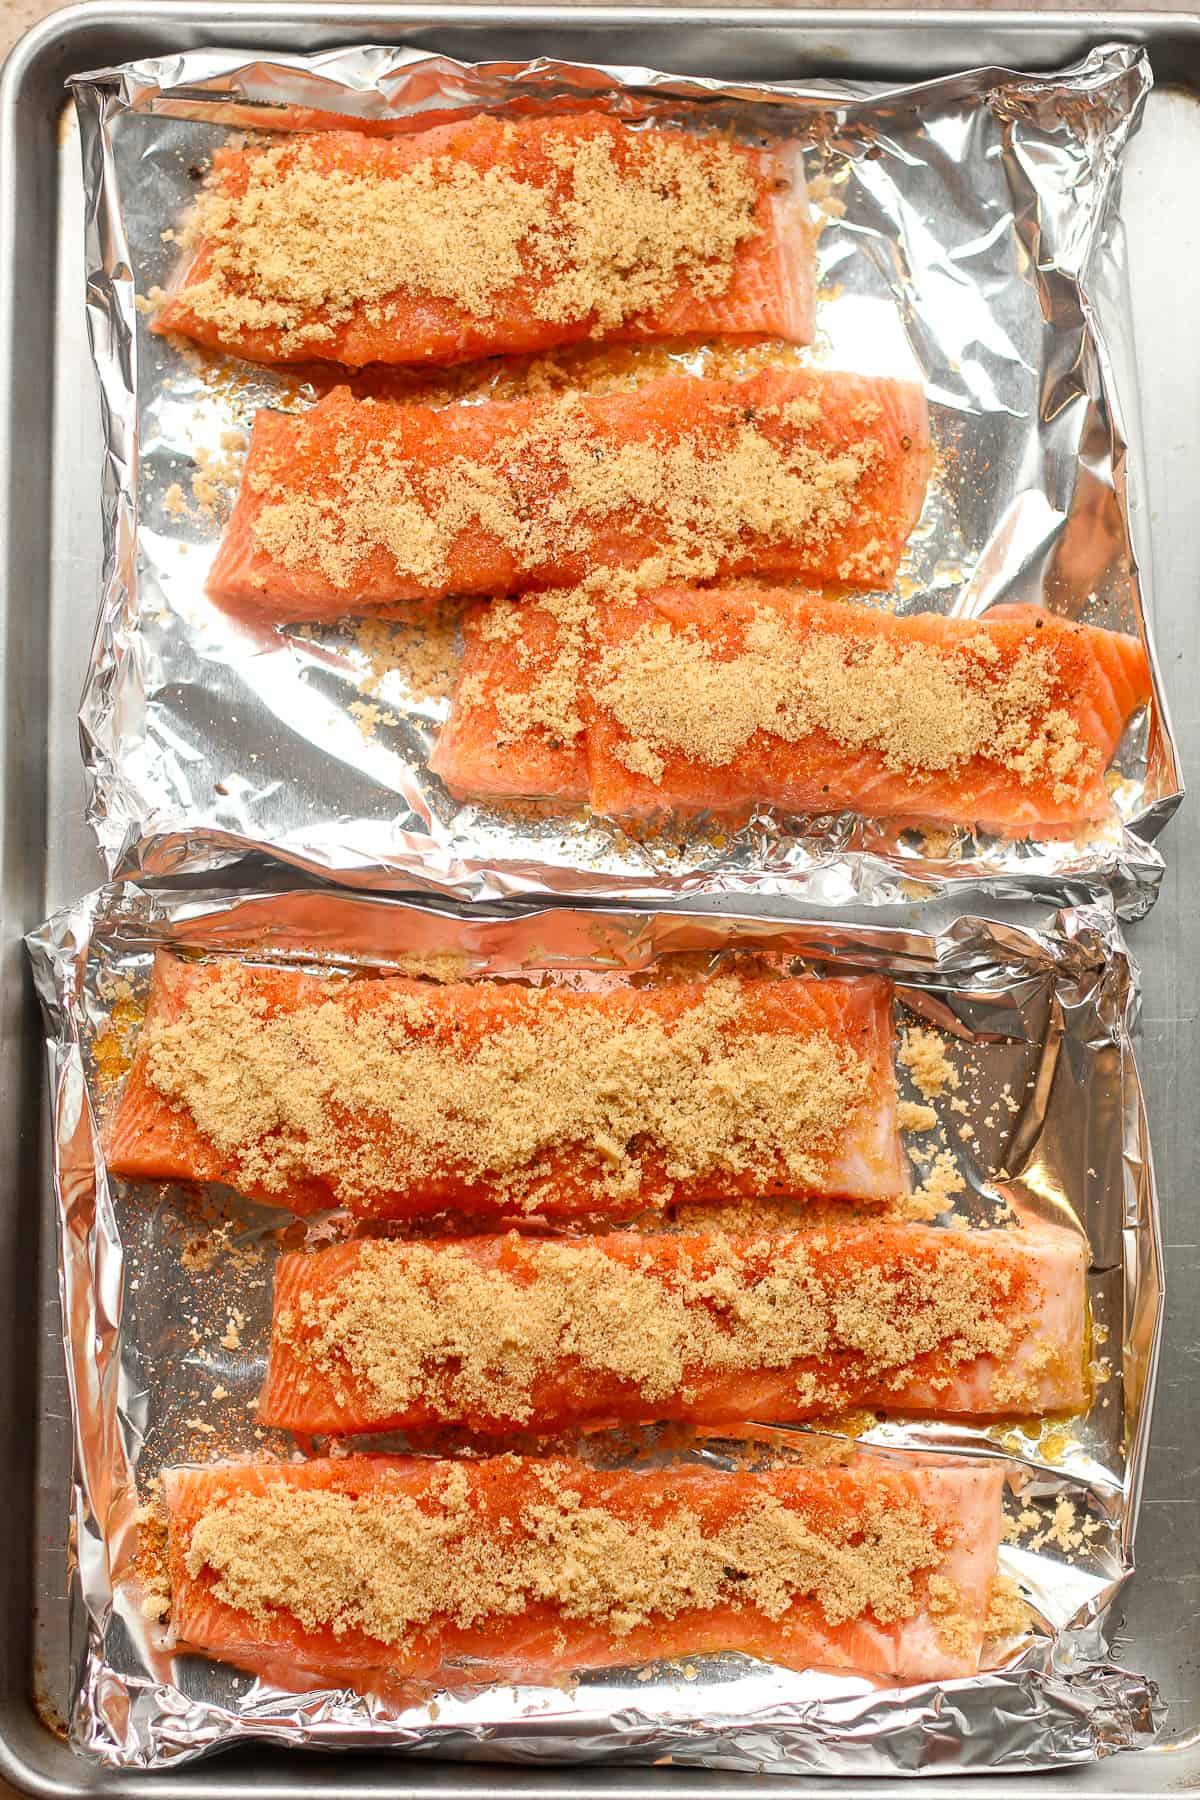 Six pieces of salmon topped with seasoning and brown sugar.